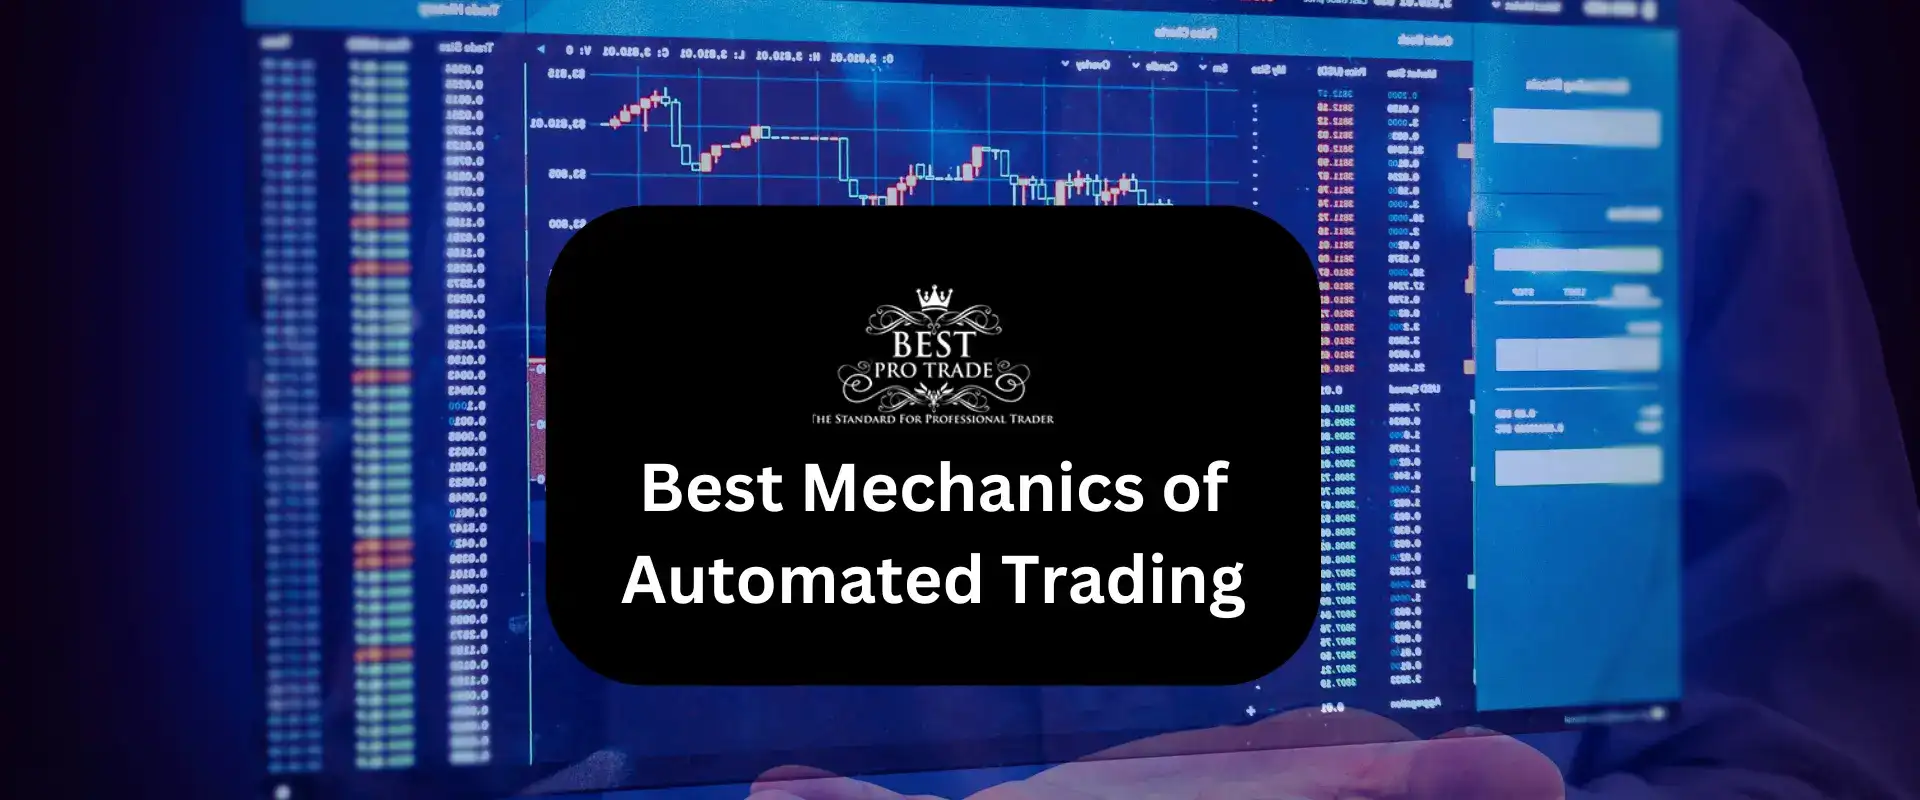 Automated Trading system